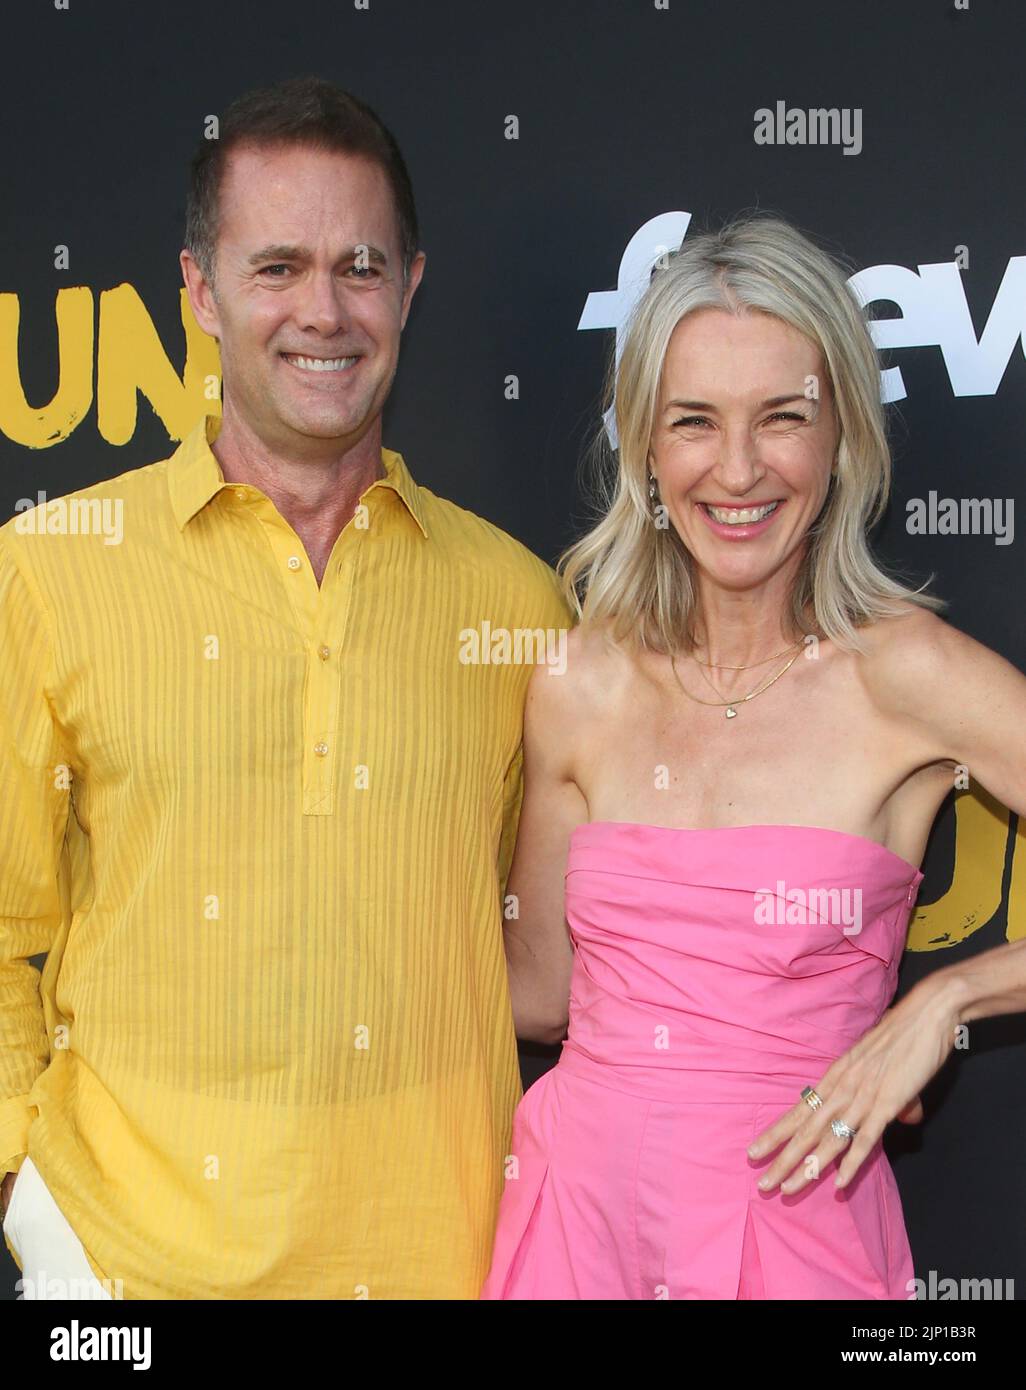 Los Angeles, California, USA. 14th Aug, 2022. Garret Dillahunt, Ever Carradine. Red Carpet Premiere Of Freevee's 'Sprung' held at the Hollywood Forever Cemetery in Los Angeles. Credit: AdMedia Photo via/Newscom/Alamy Live News Stock Photo